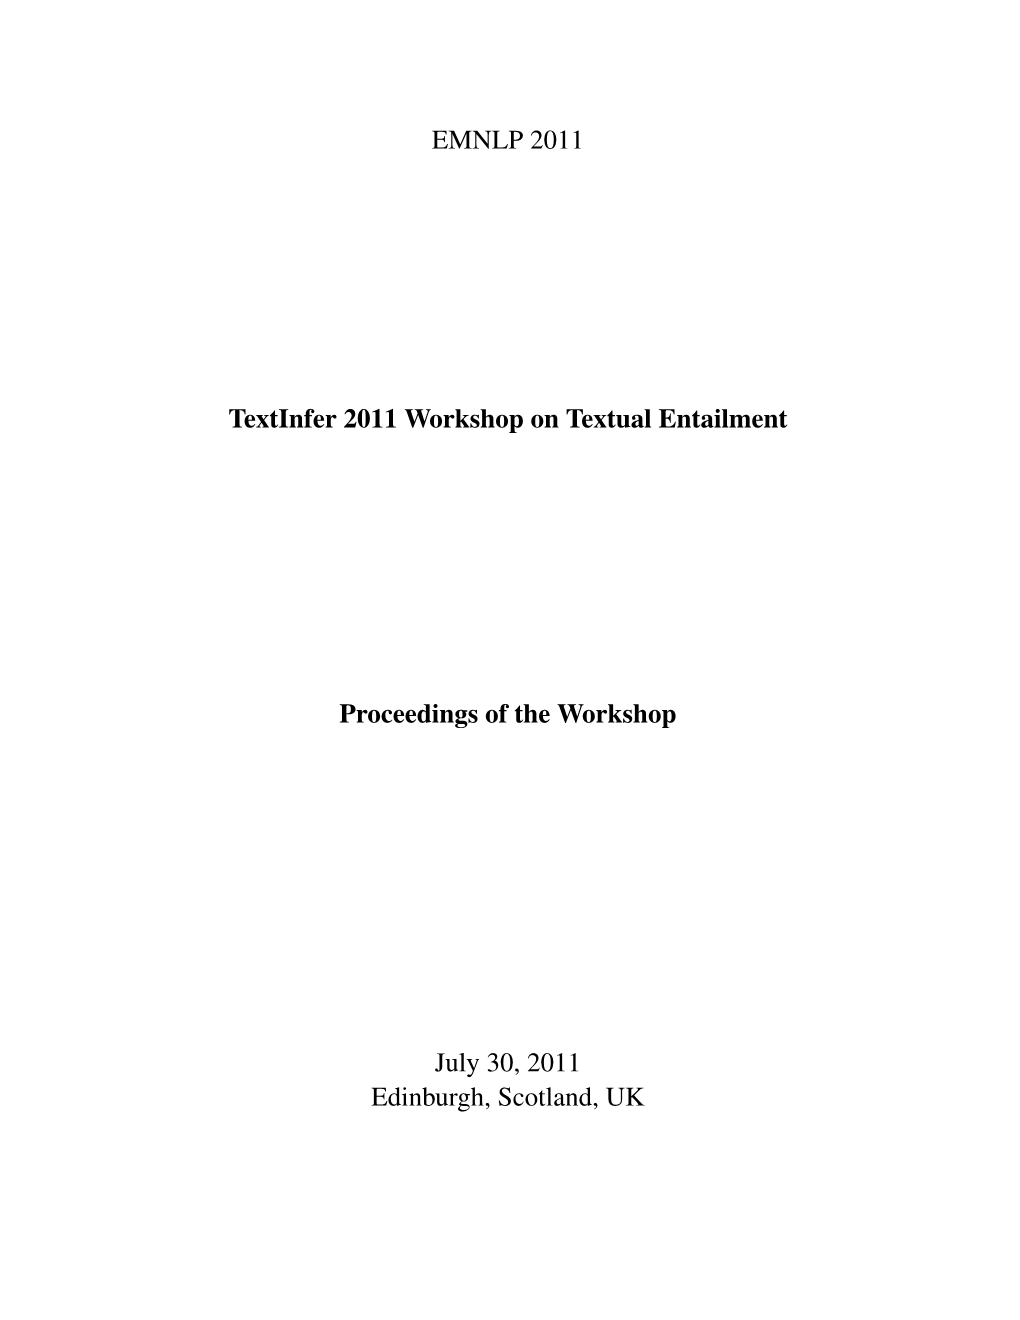 Proceedings of the Textinfer 2011 Workshop on Applied Textual